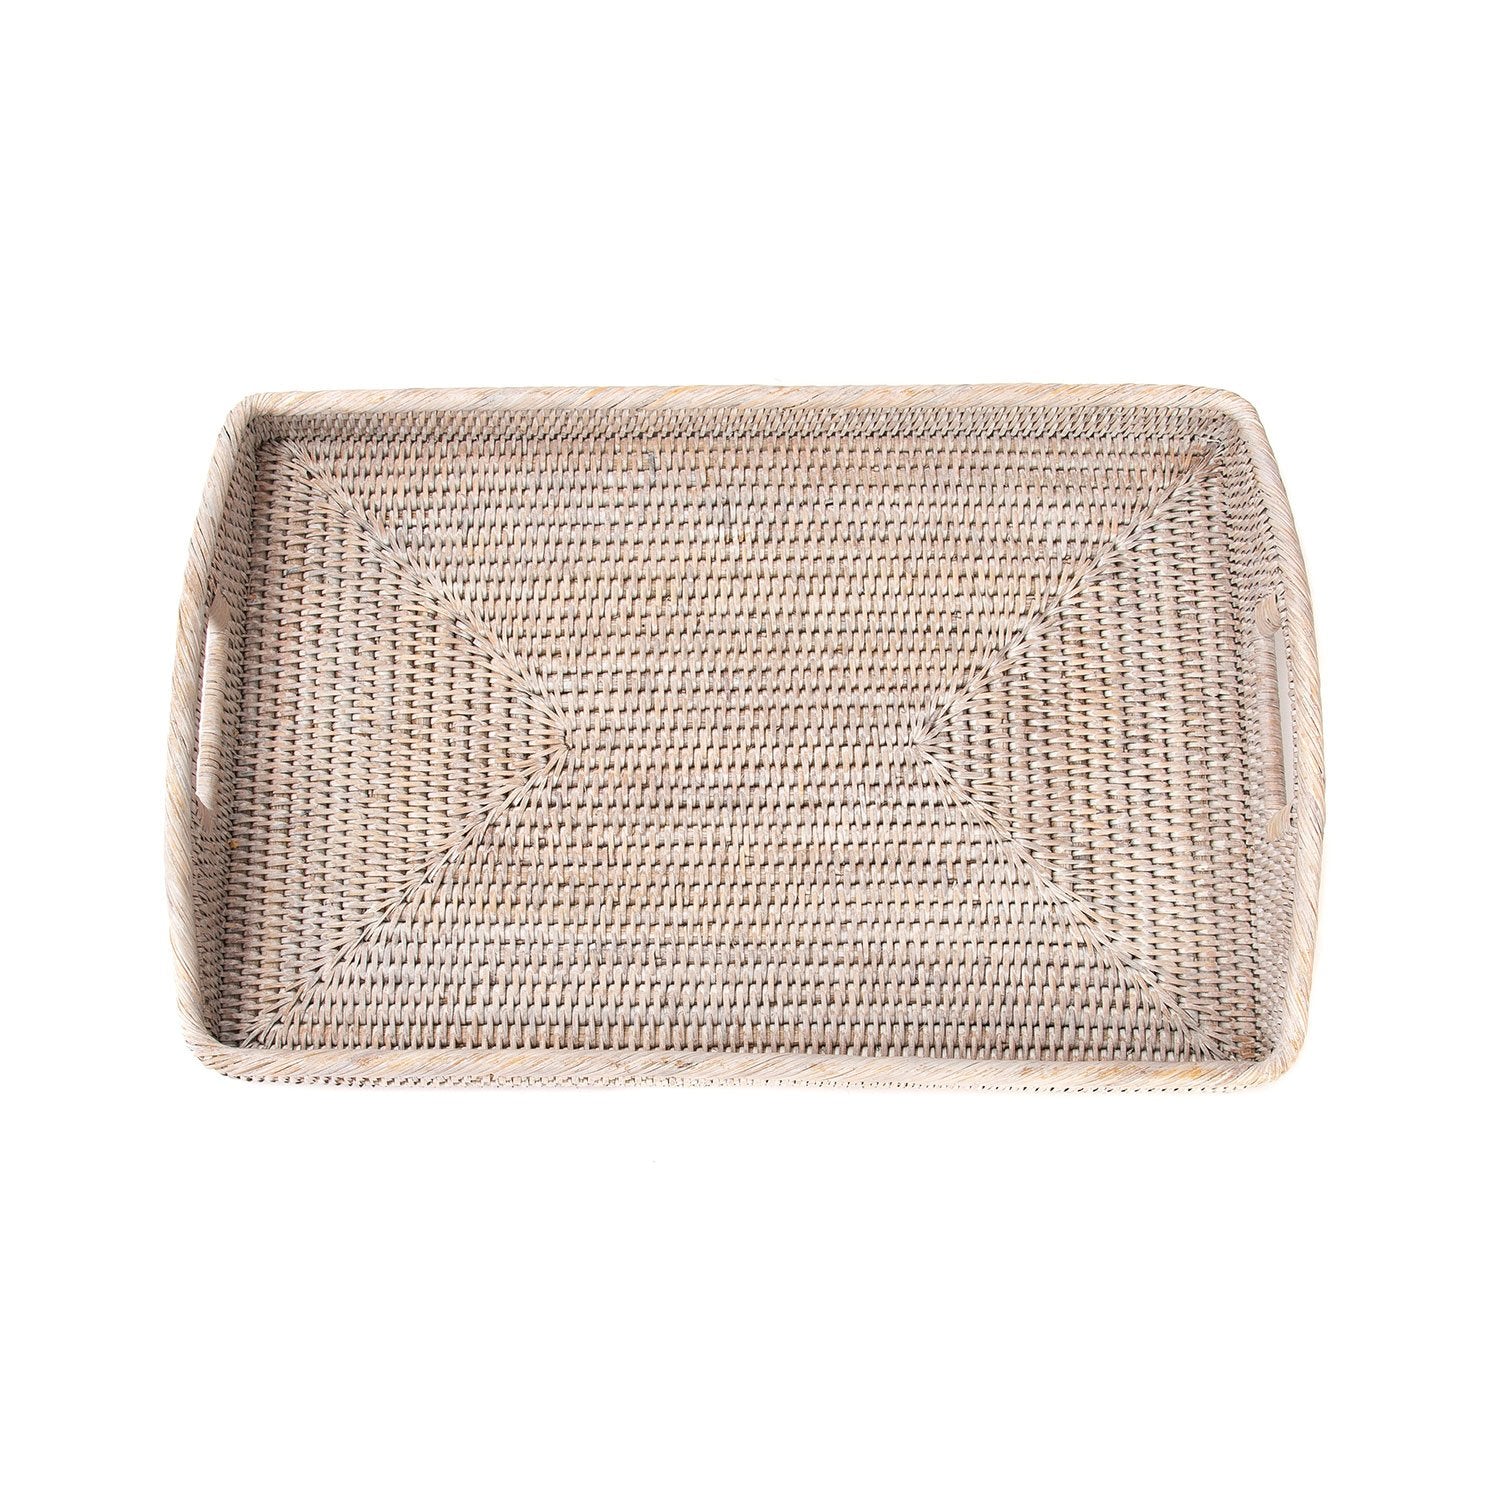 Large Woven Tray with Handles in Whitewash